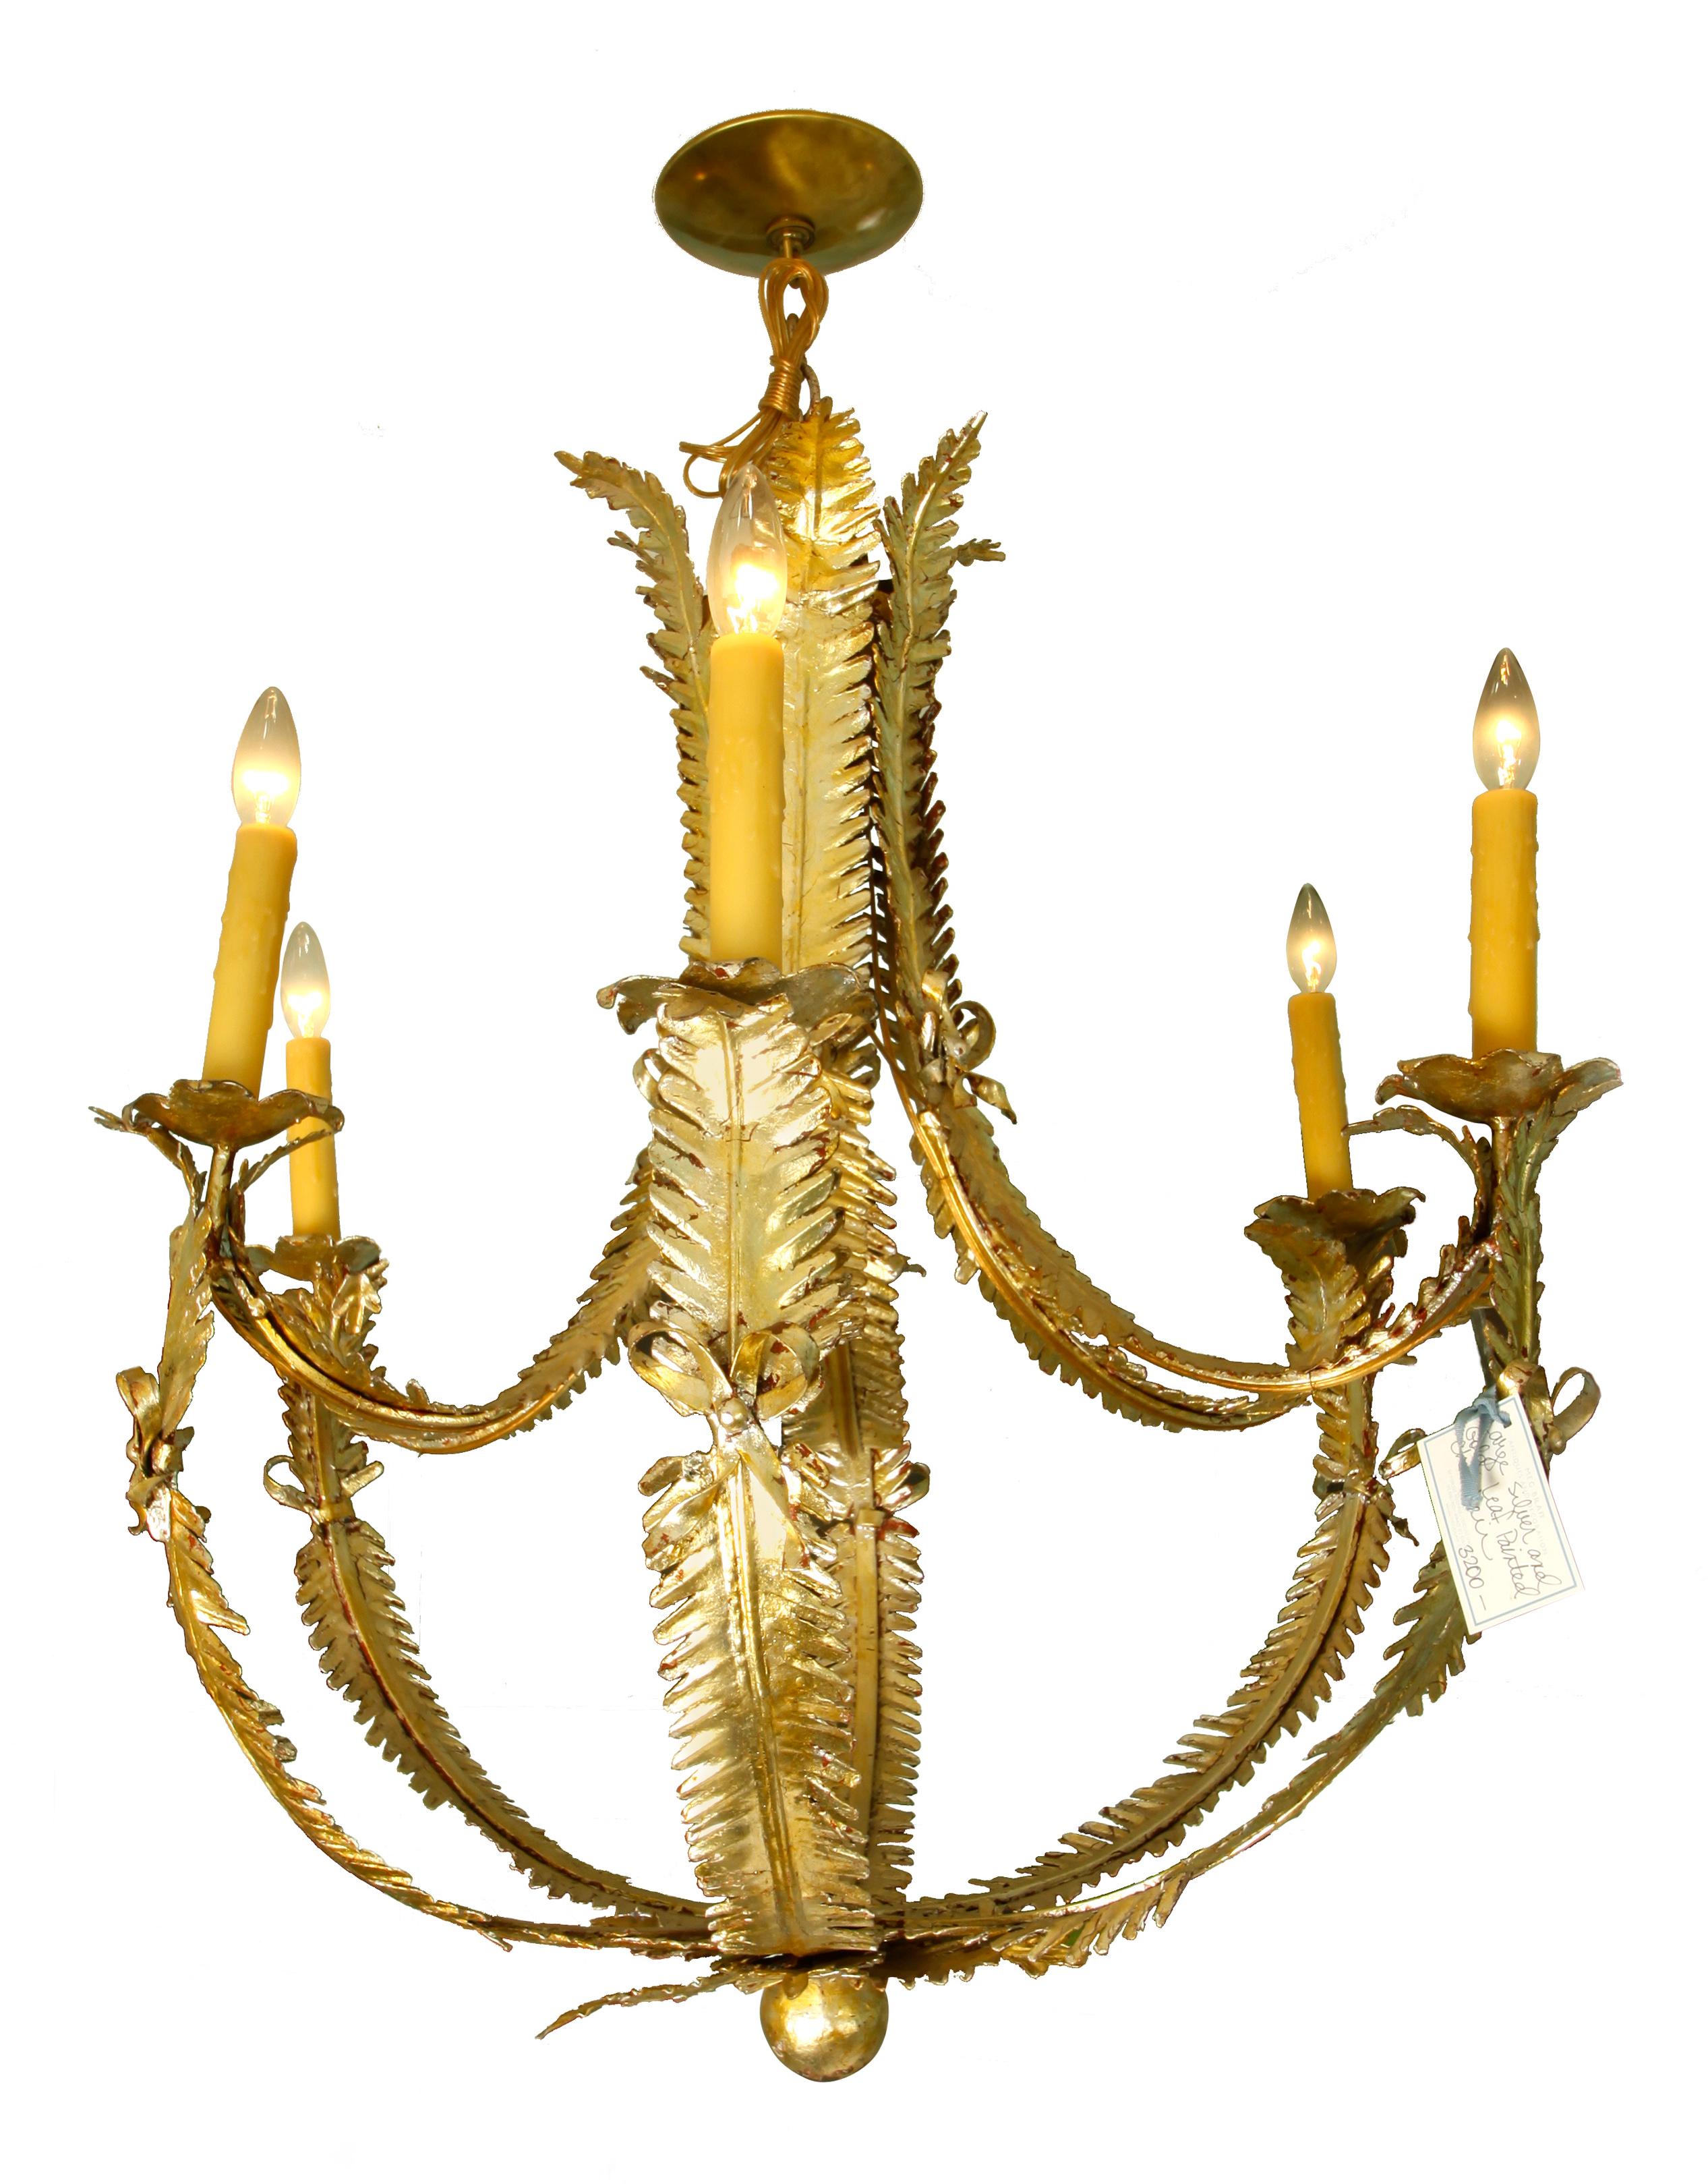 A pair of gold leaf foliate 6-light metal chandeliers. Delicate fern frond shapes with bows at joints.